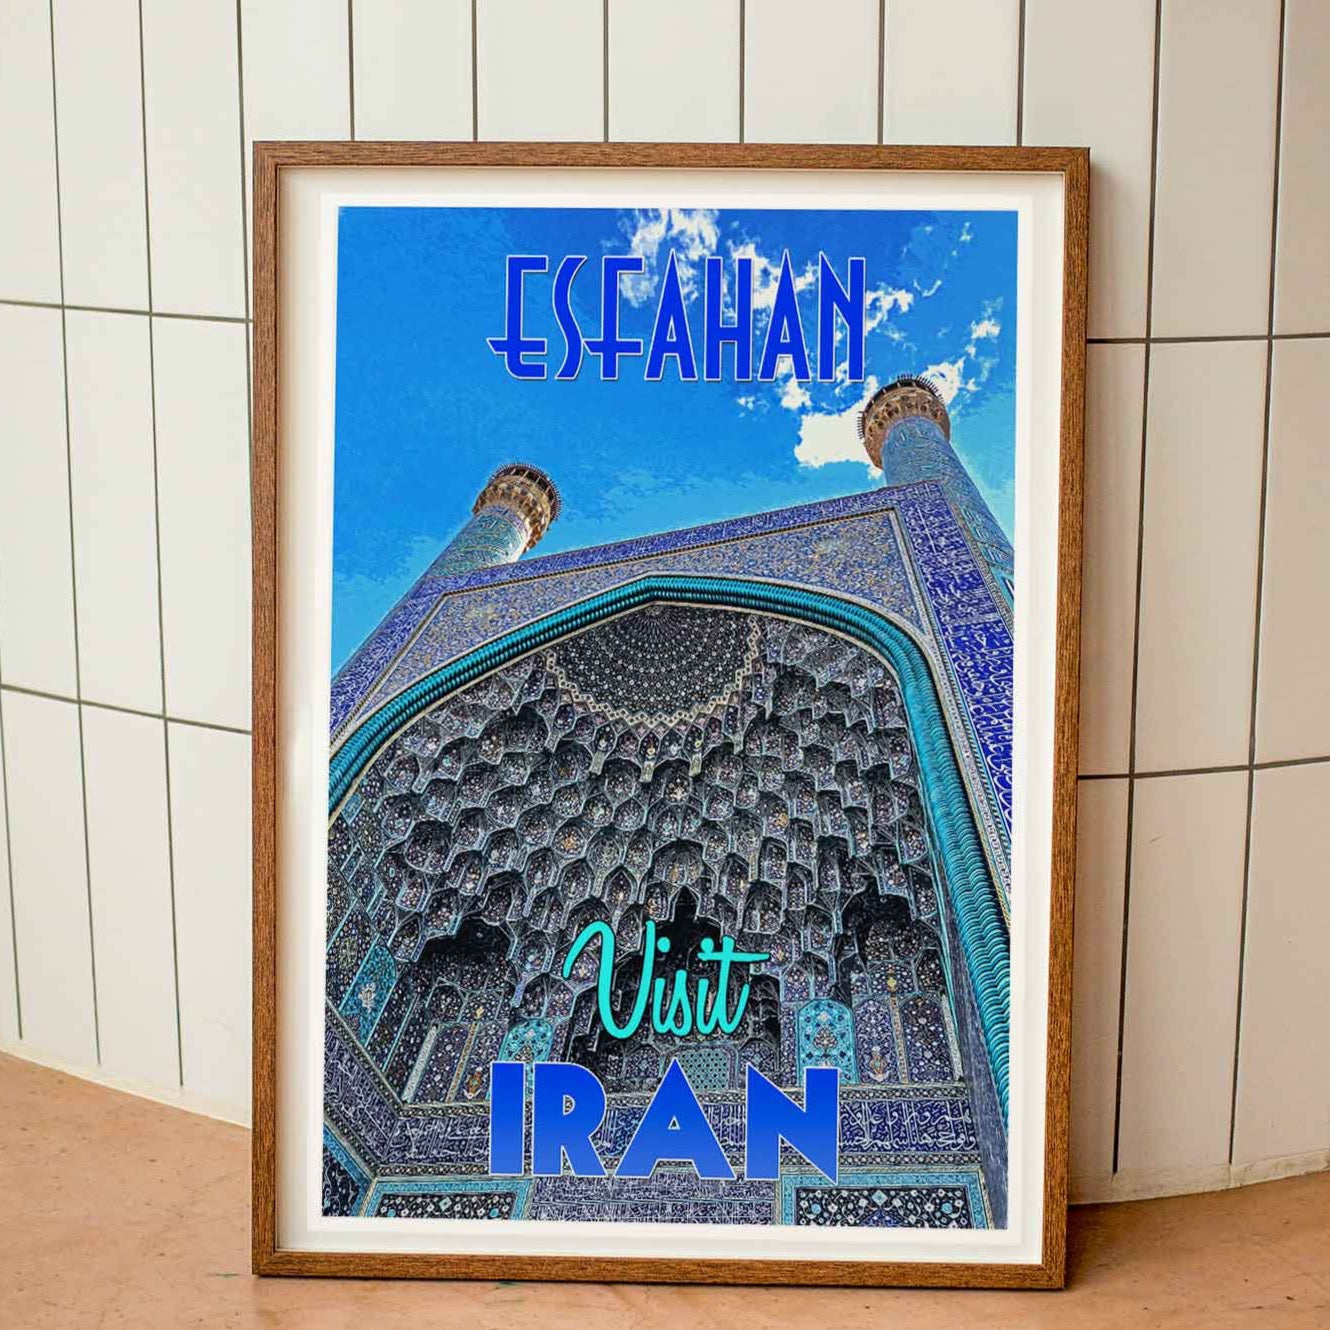 Wood-framed vintage travel poster print featuring the awe-inspiring Shah Mosque in Esfahan, Iran, symbolizing the beauty and charm of emerging travel destinations worldwide.